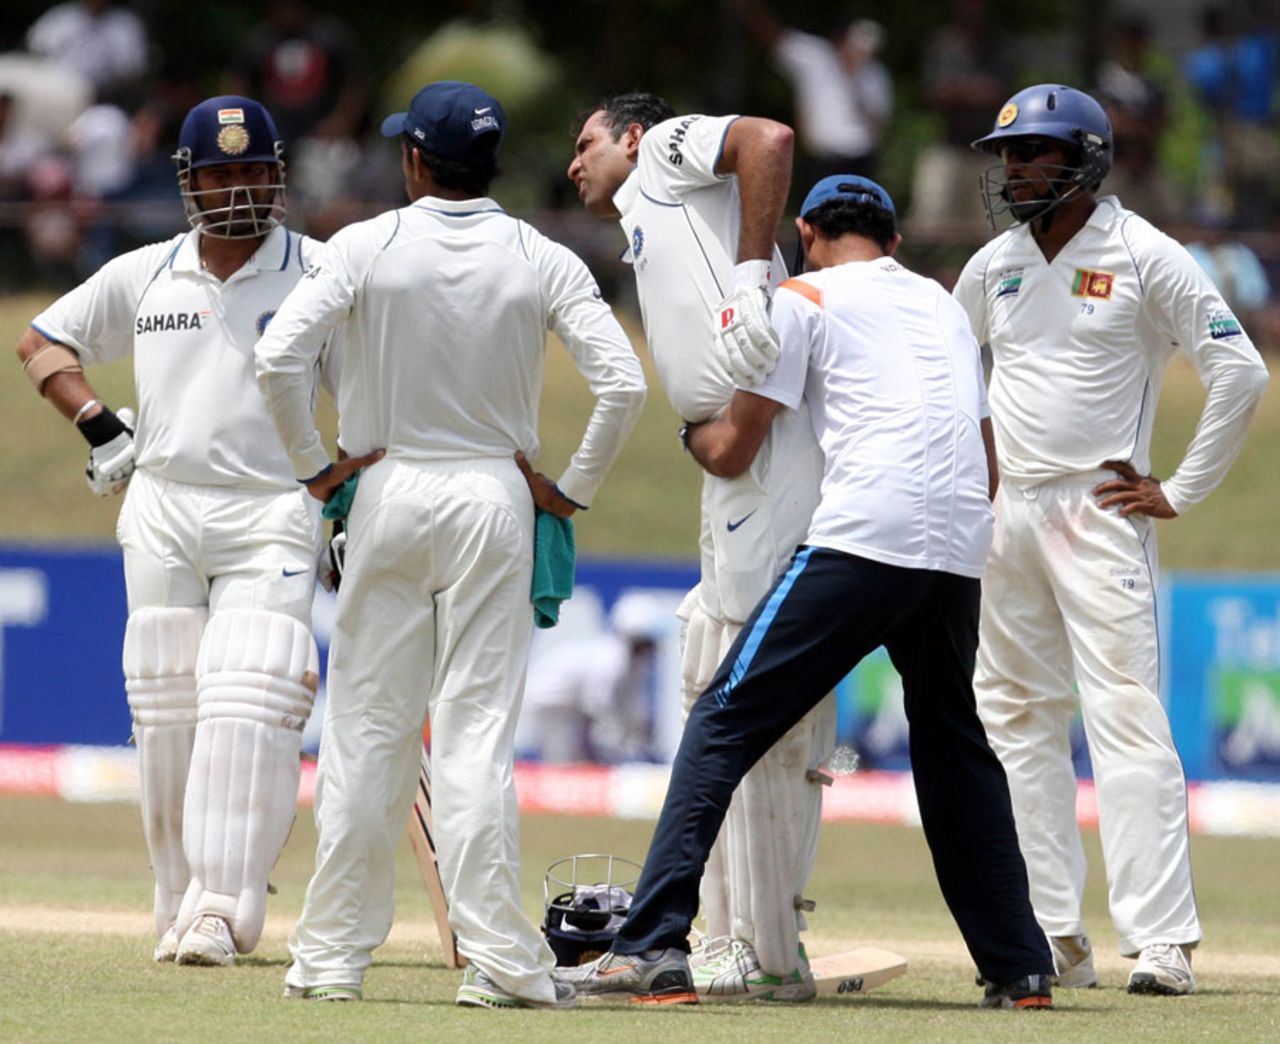 VVS Laxman was troubled by back spasms throughout his innings, Sri Lanka v India, 3rd Test, P Sara Oval, 5th day, August 7, 2010